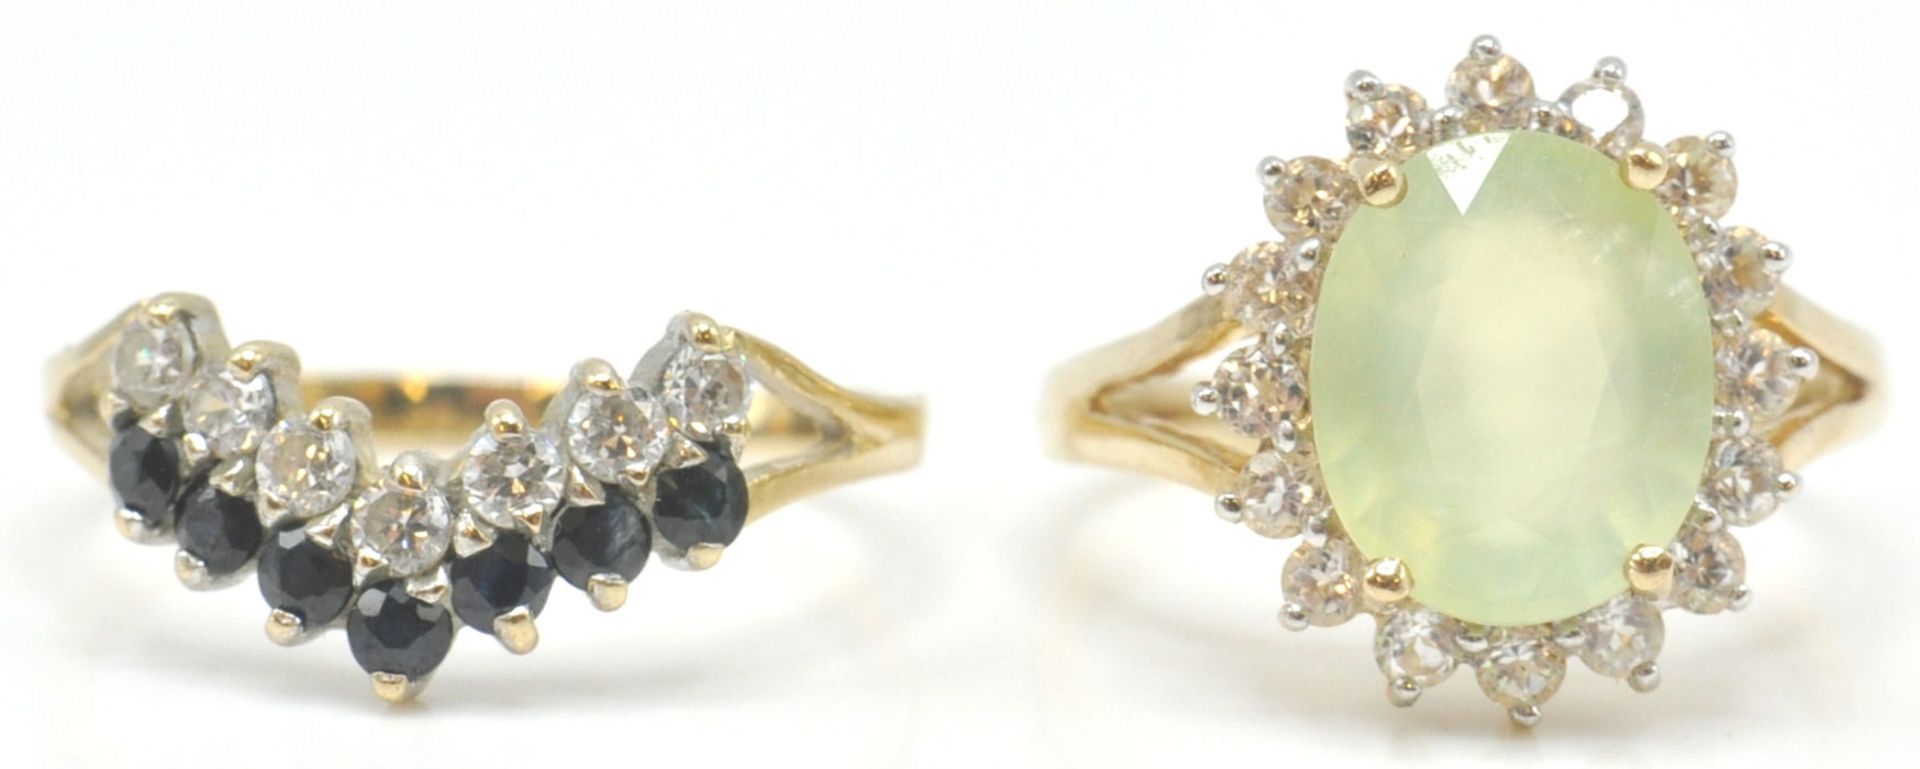 A 9ct gold hallmarked cluster ring. The yellow facet cut stone within a halo of white stones.